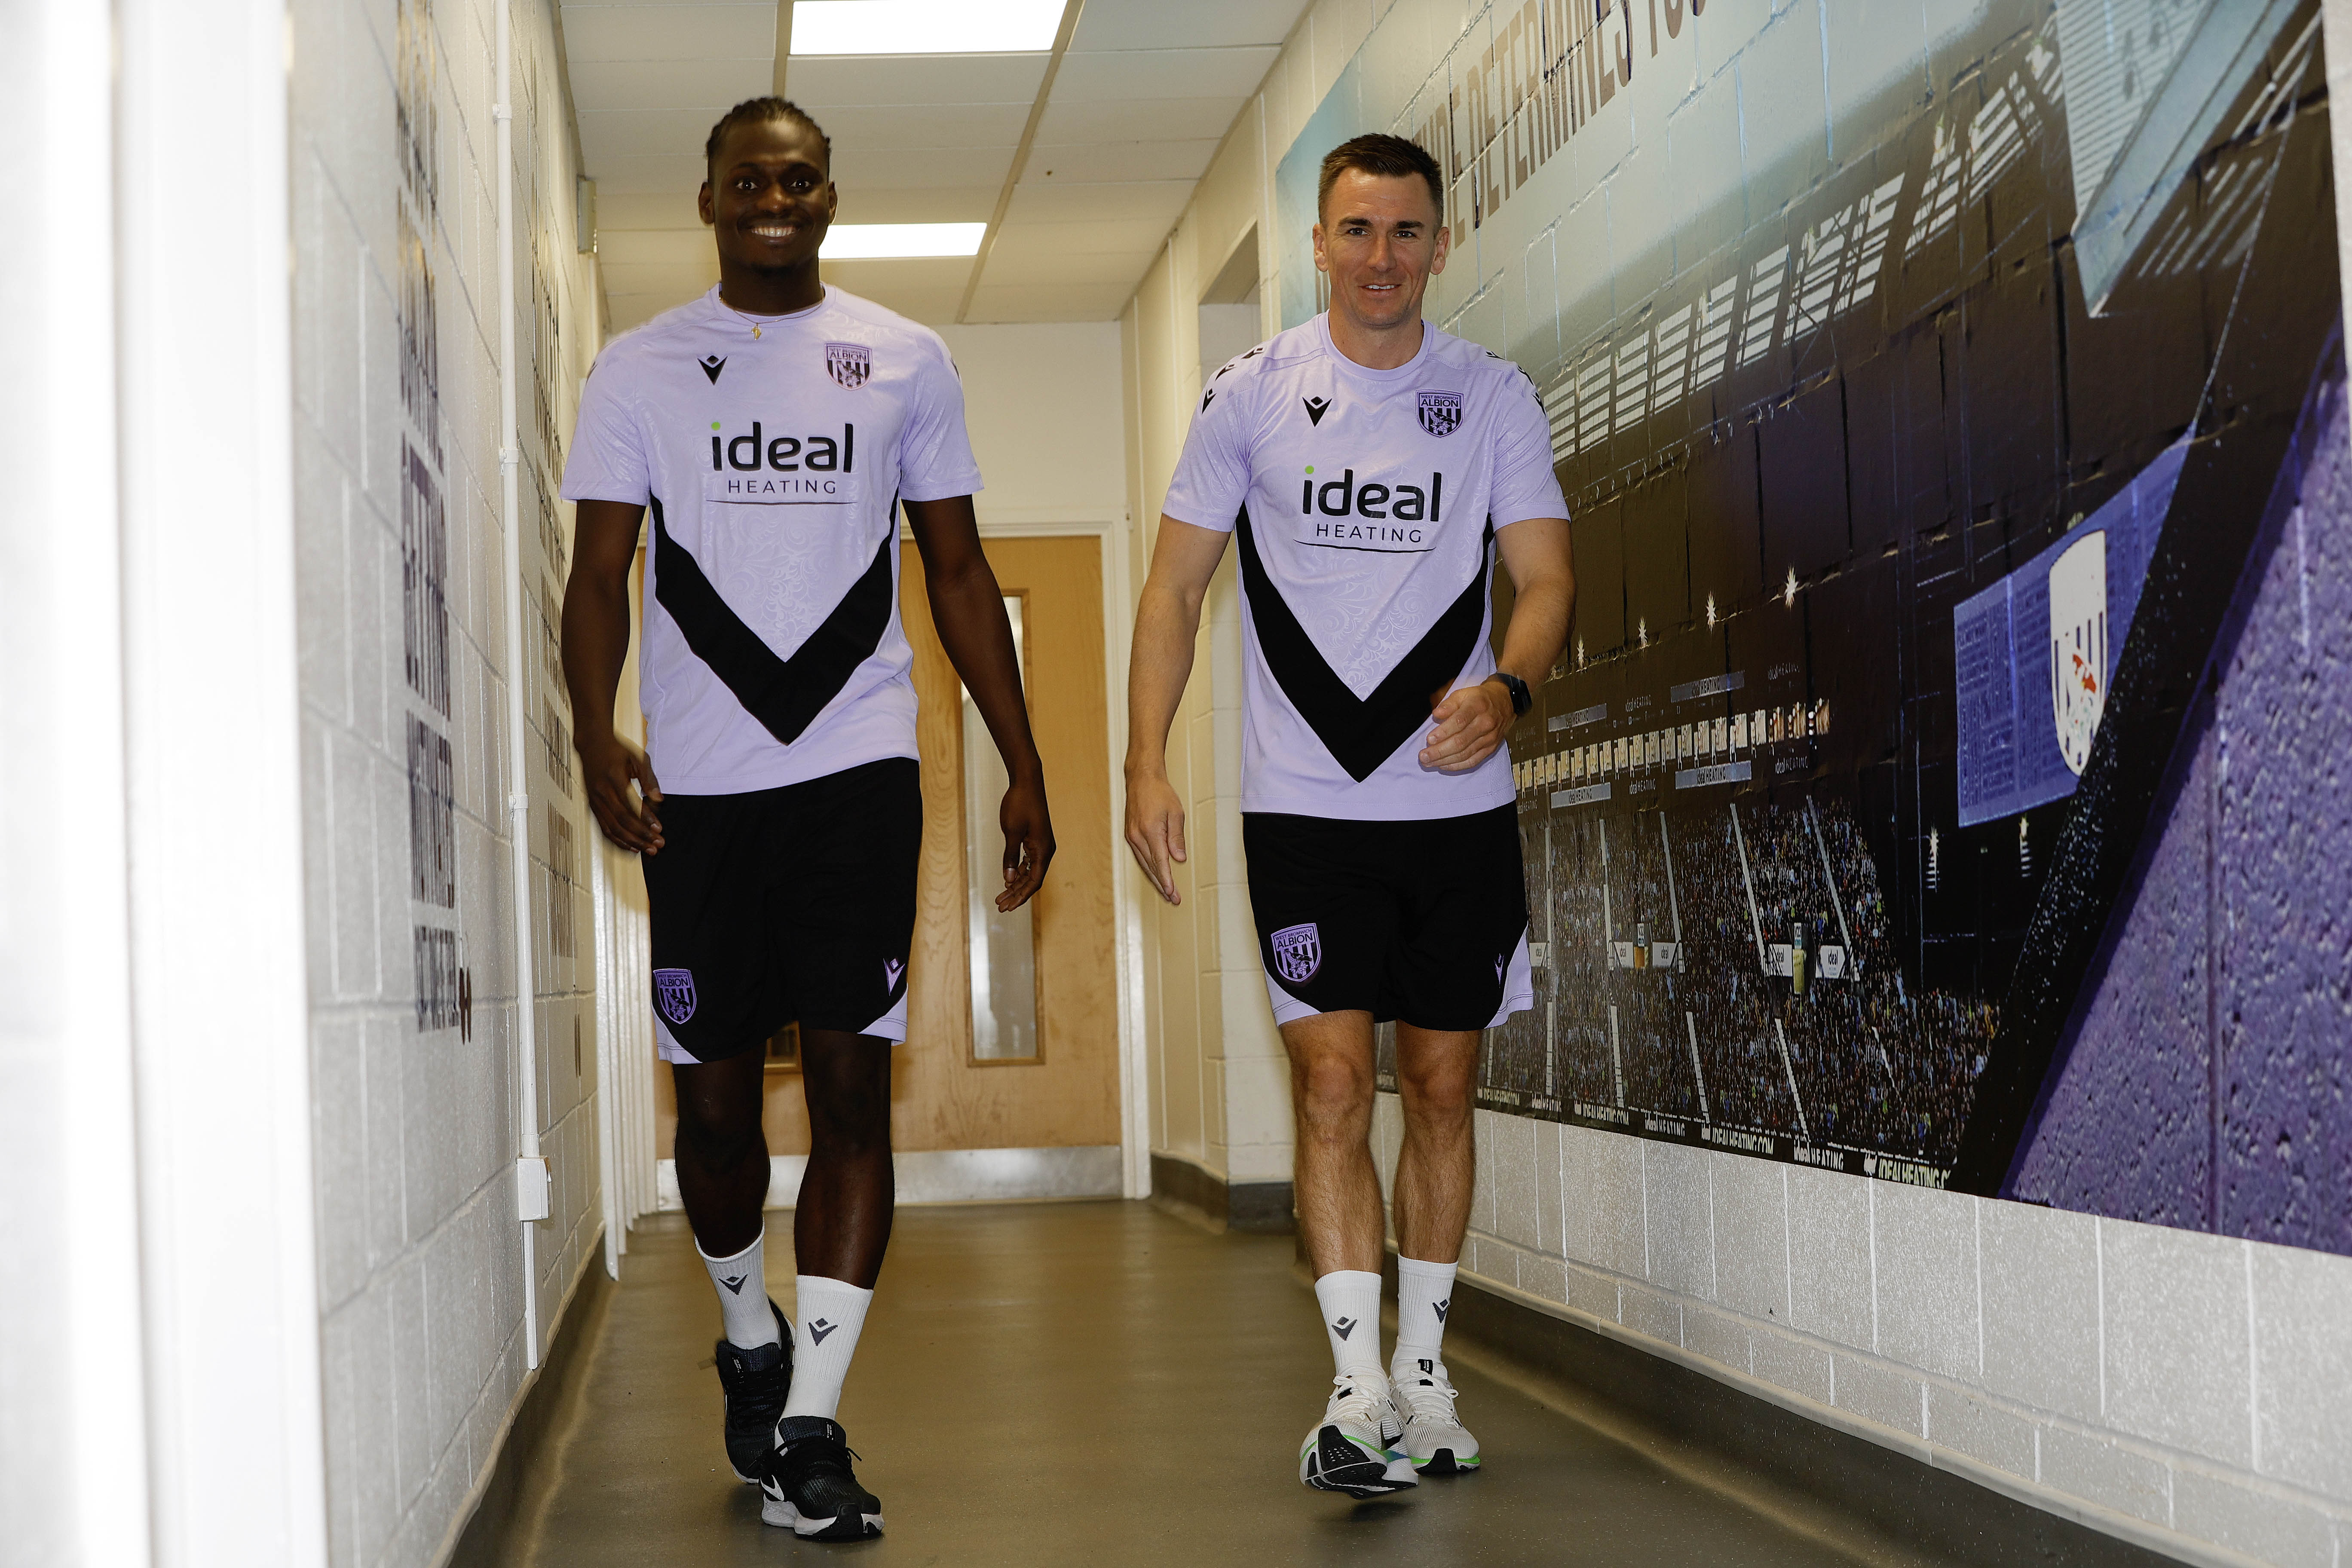 Ousmane Diakité and Jed Wallace chatting while walking down a corridor 